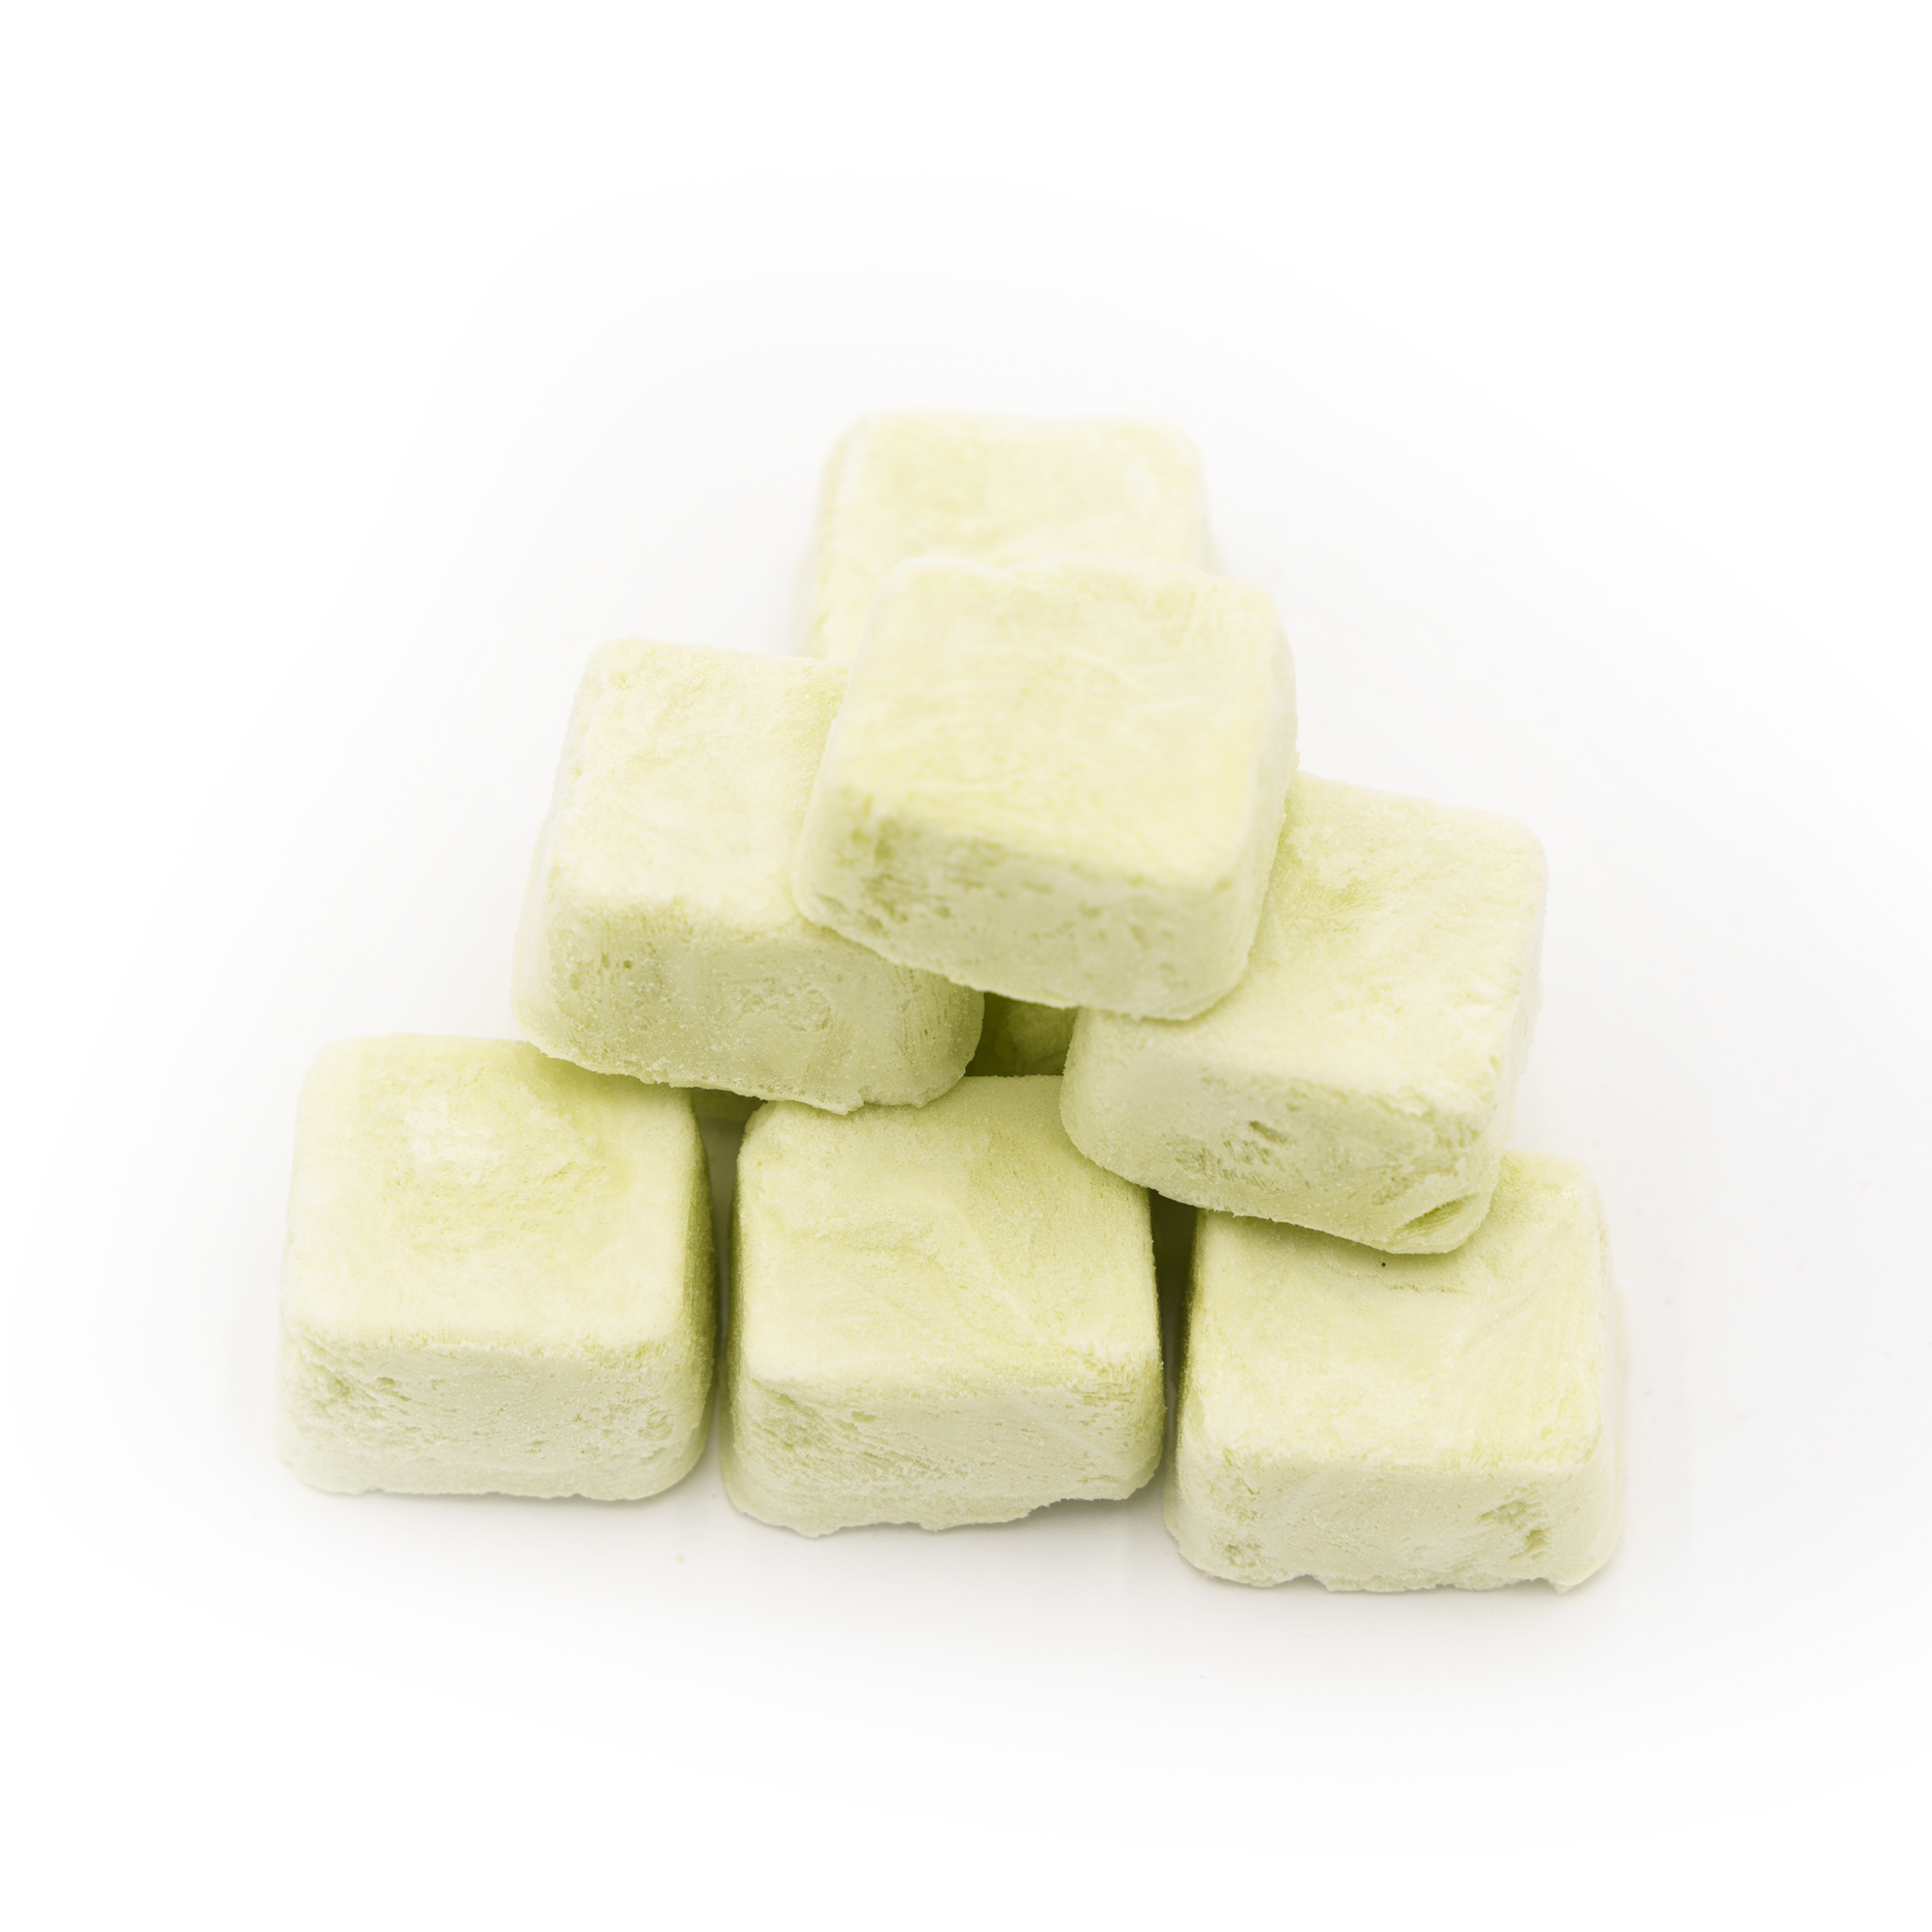 Freeze-Dried Yogurt Cubes (Kale & Spinach) | Made with Real Yogurt and Vegetables| Yogurt Snack Wholesale Bulk Freeze Dried Yogurt & Fruit Snacks